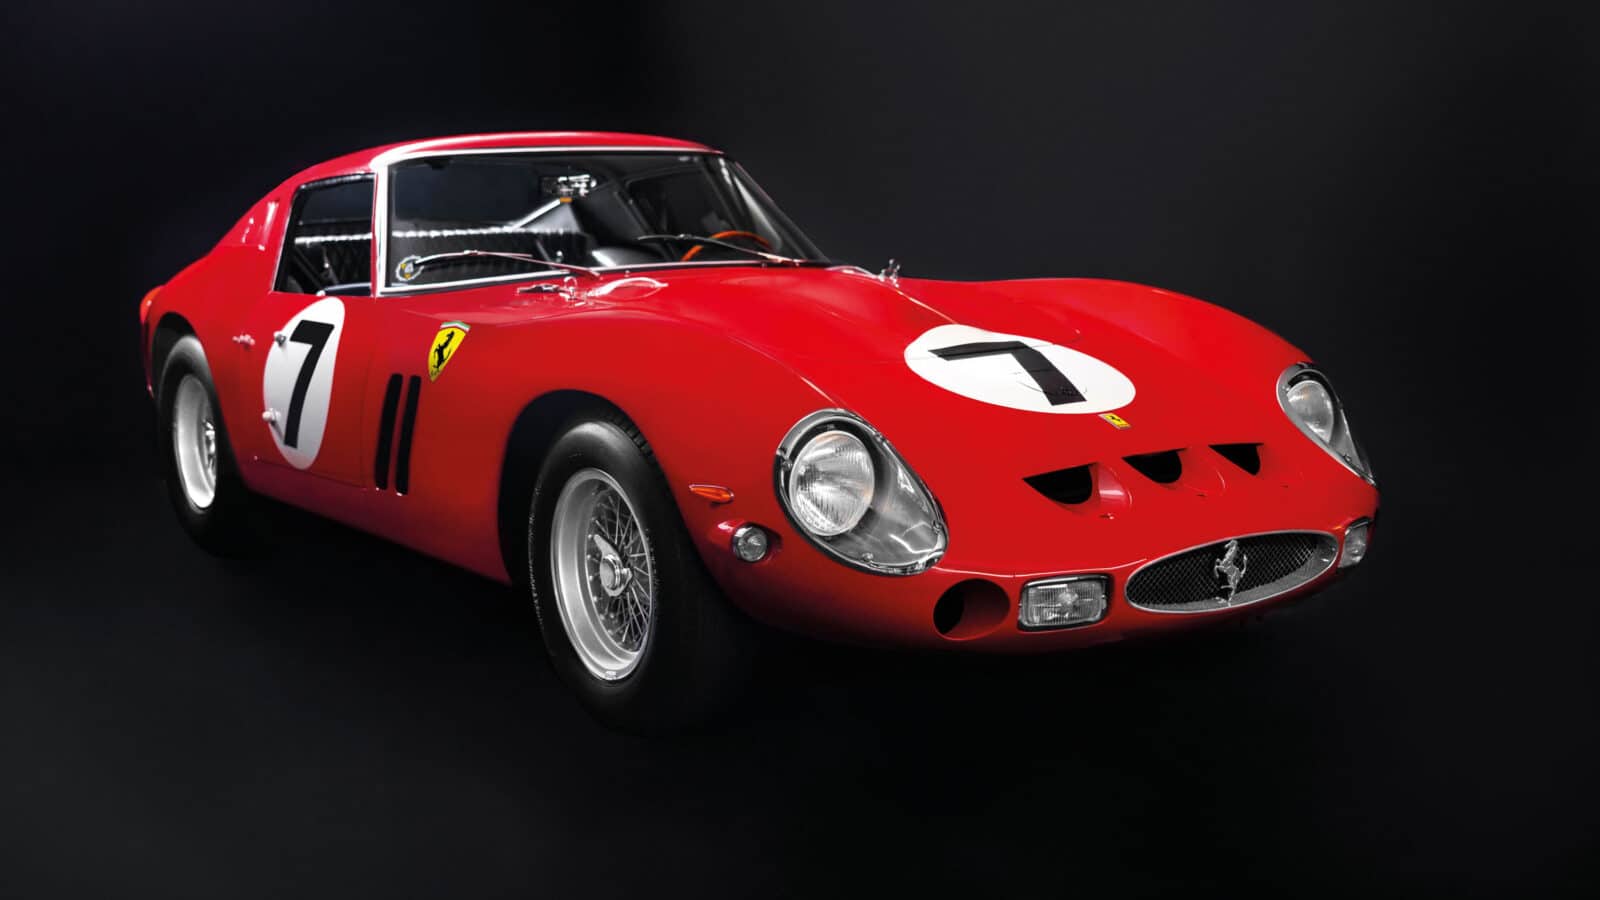 A Rare 4.0-Liter Ferrari 250 GTO Is Being Sold Next Month